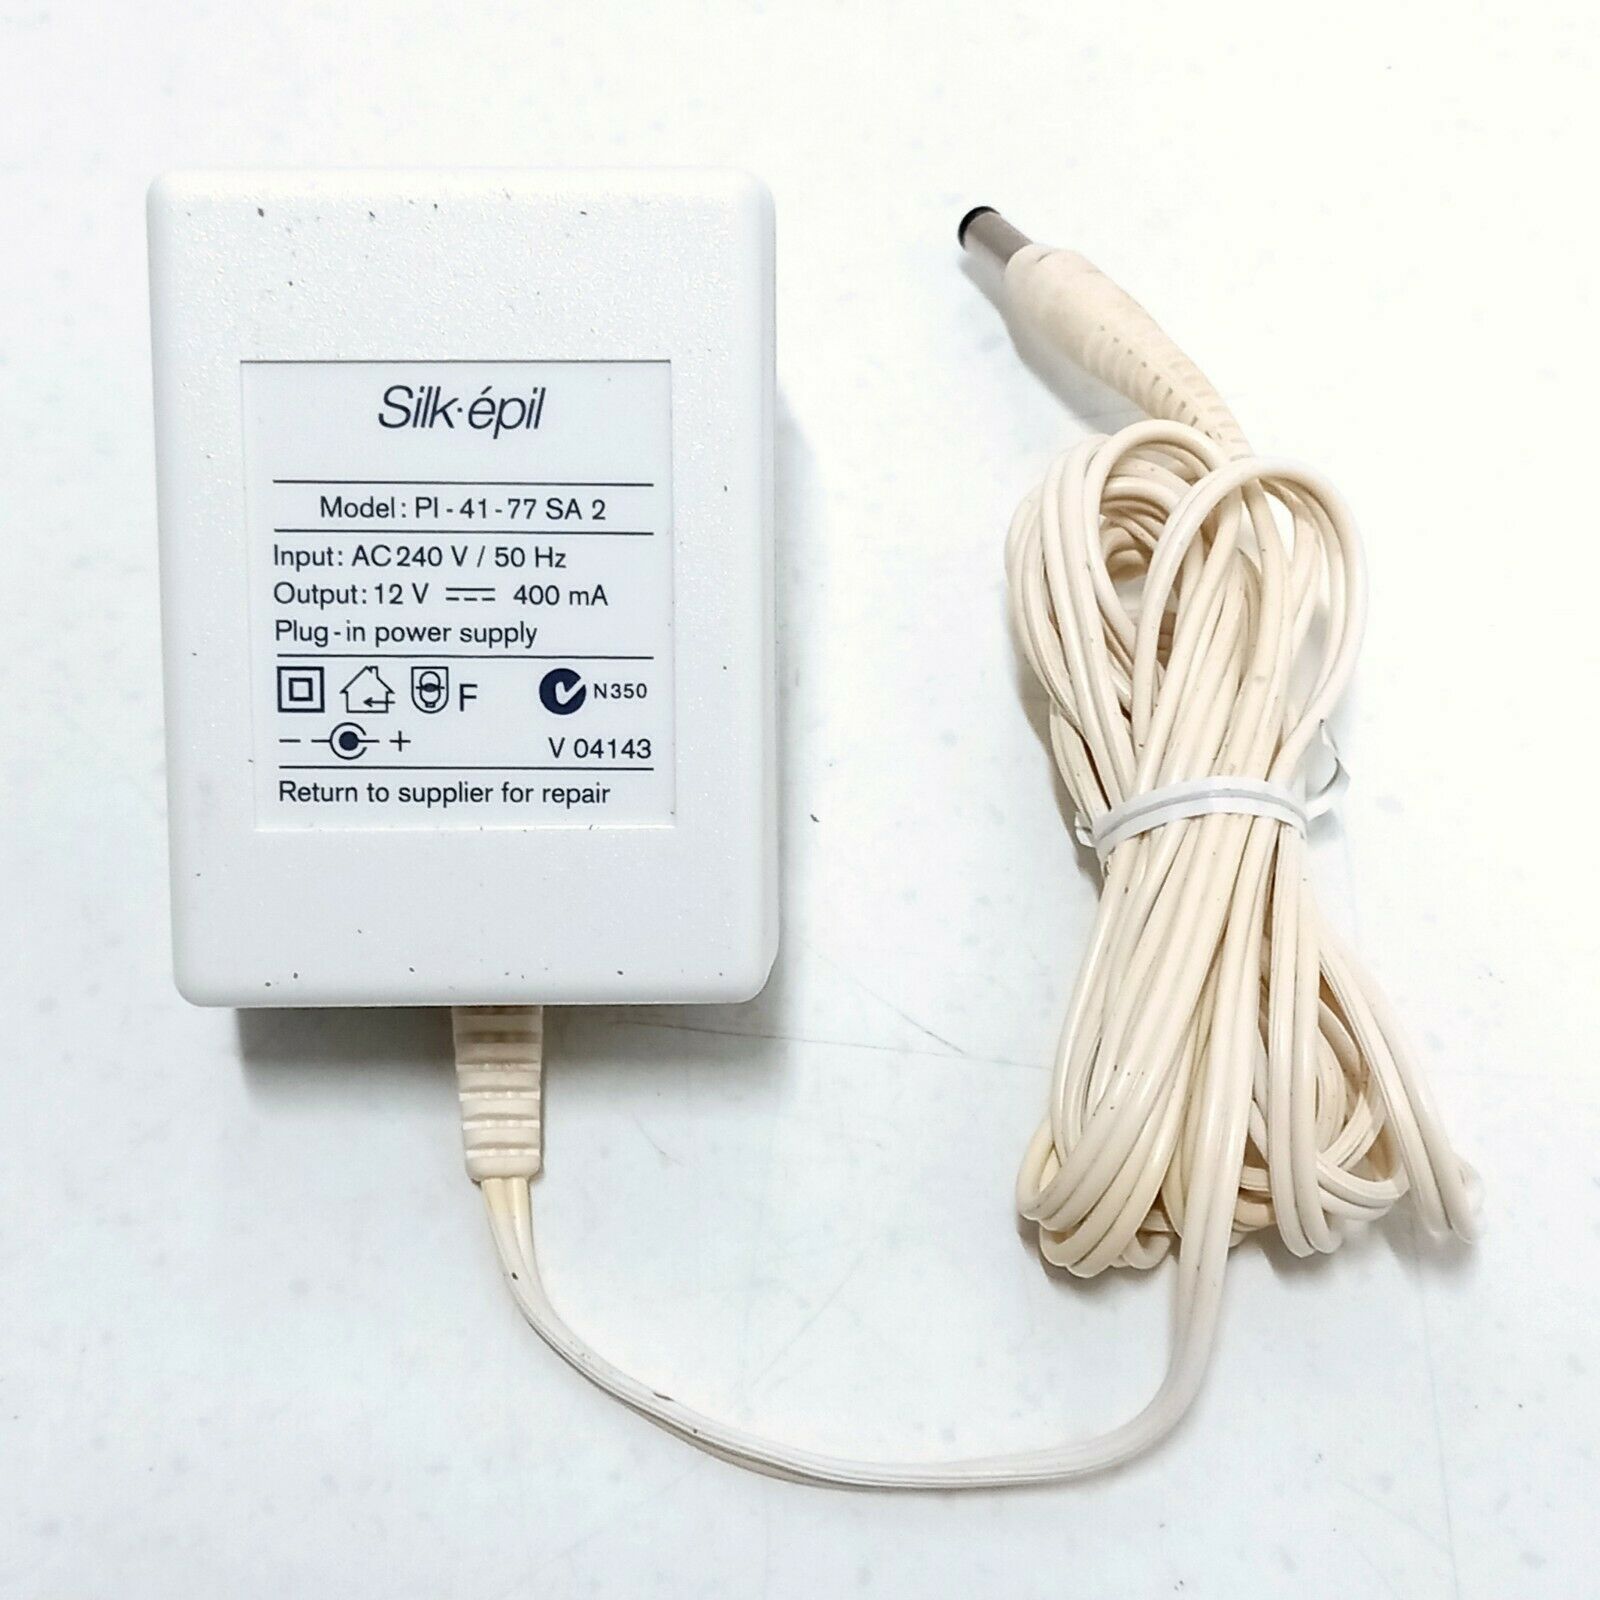 Silk epil AC Adapter Pi-41-77SA2 12v Power Supply Type: AC/DC Adapter Brand: Silk epil Features: Powered Colour: White